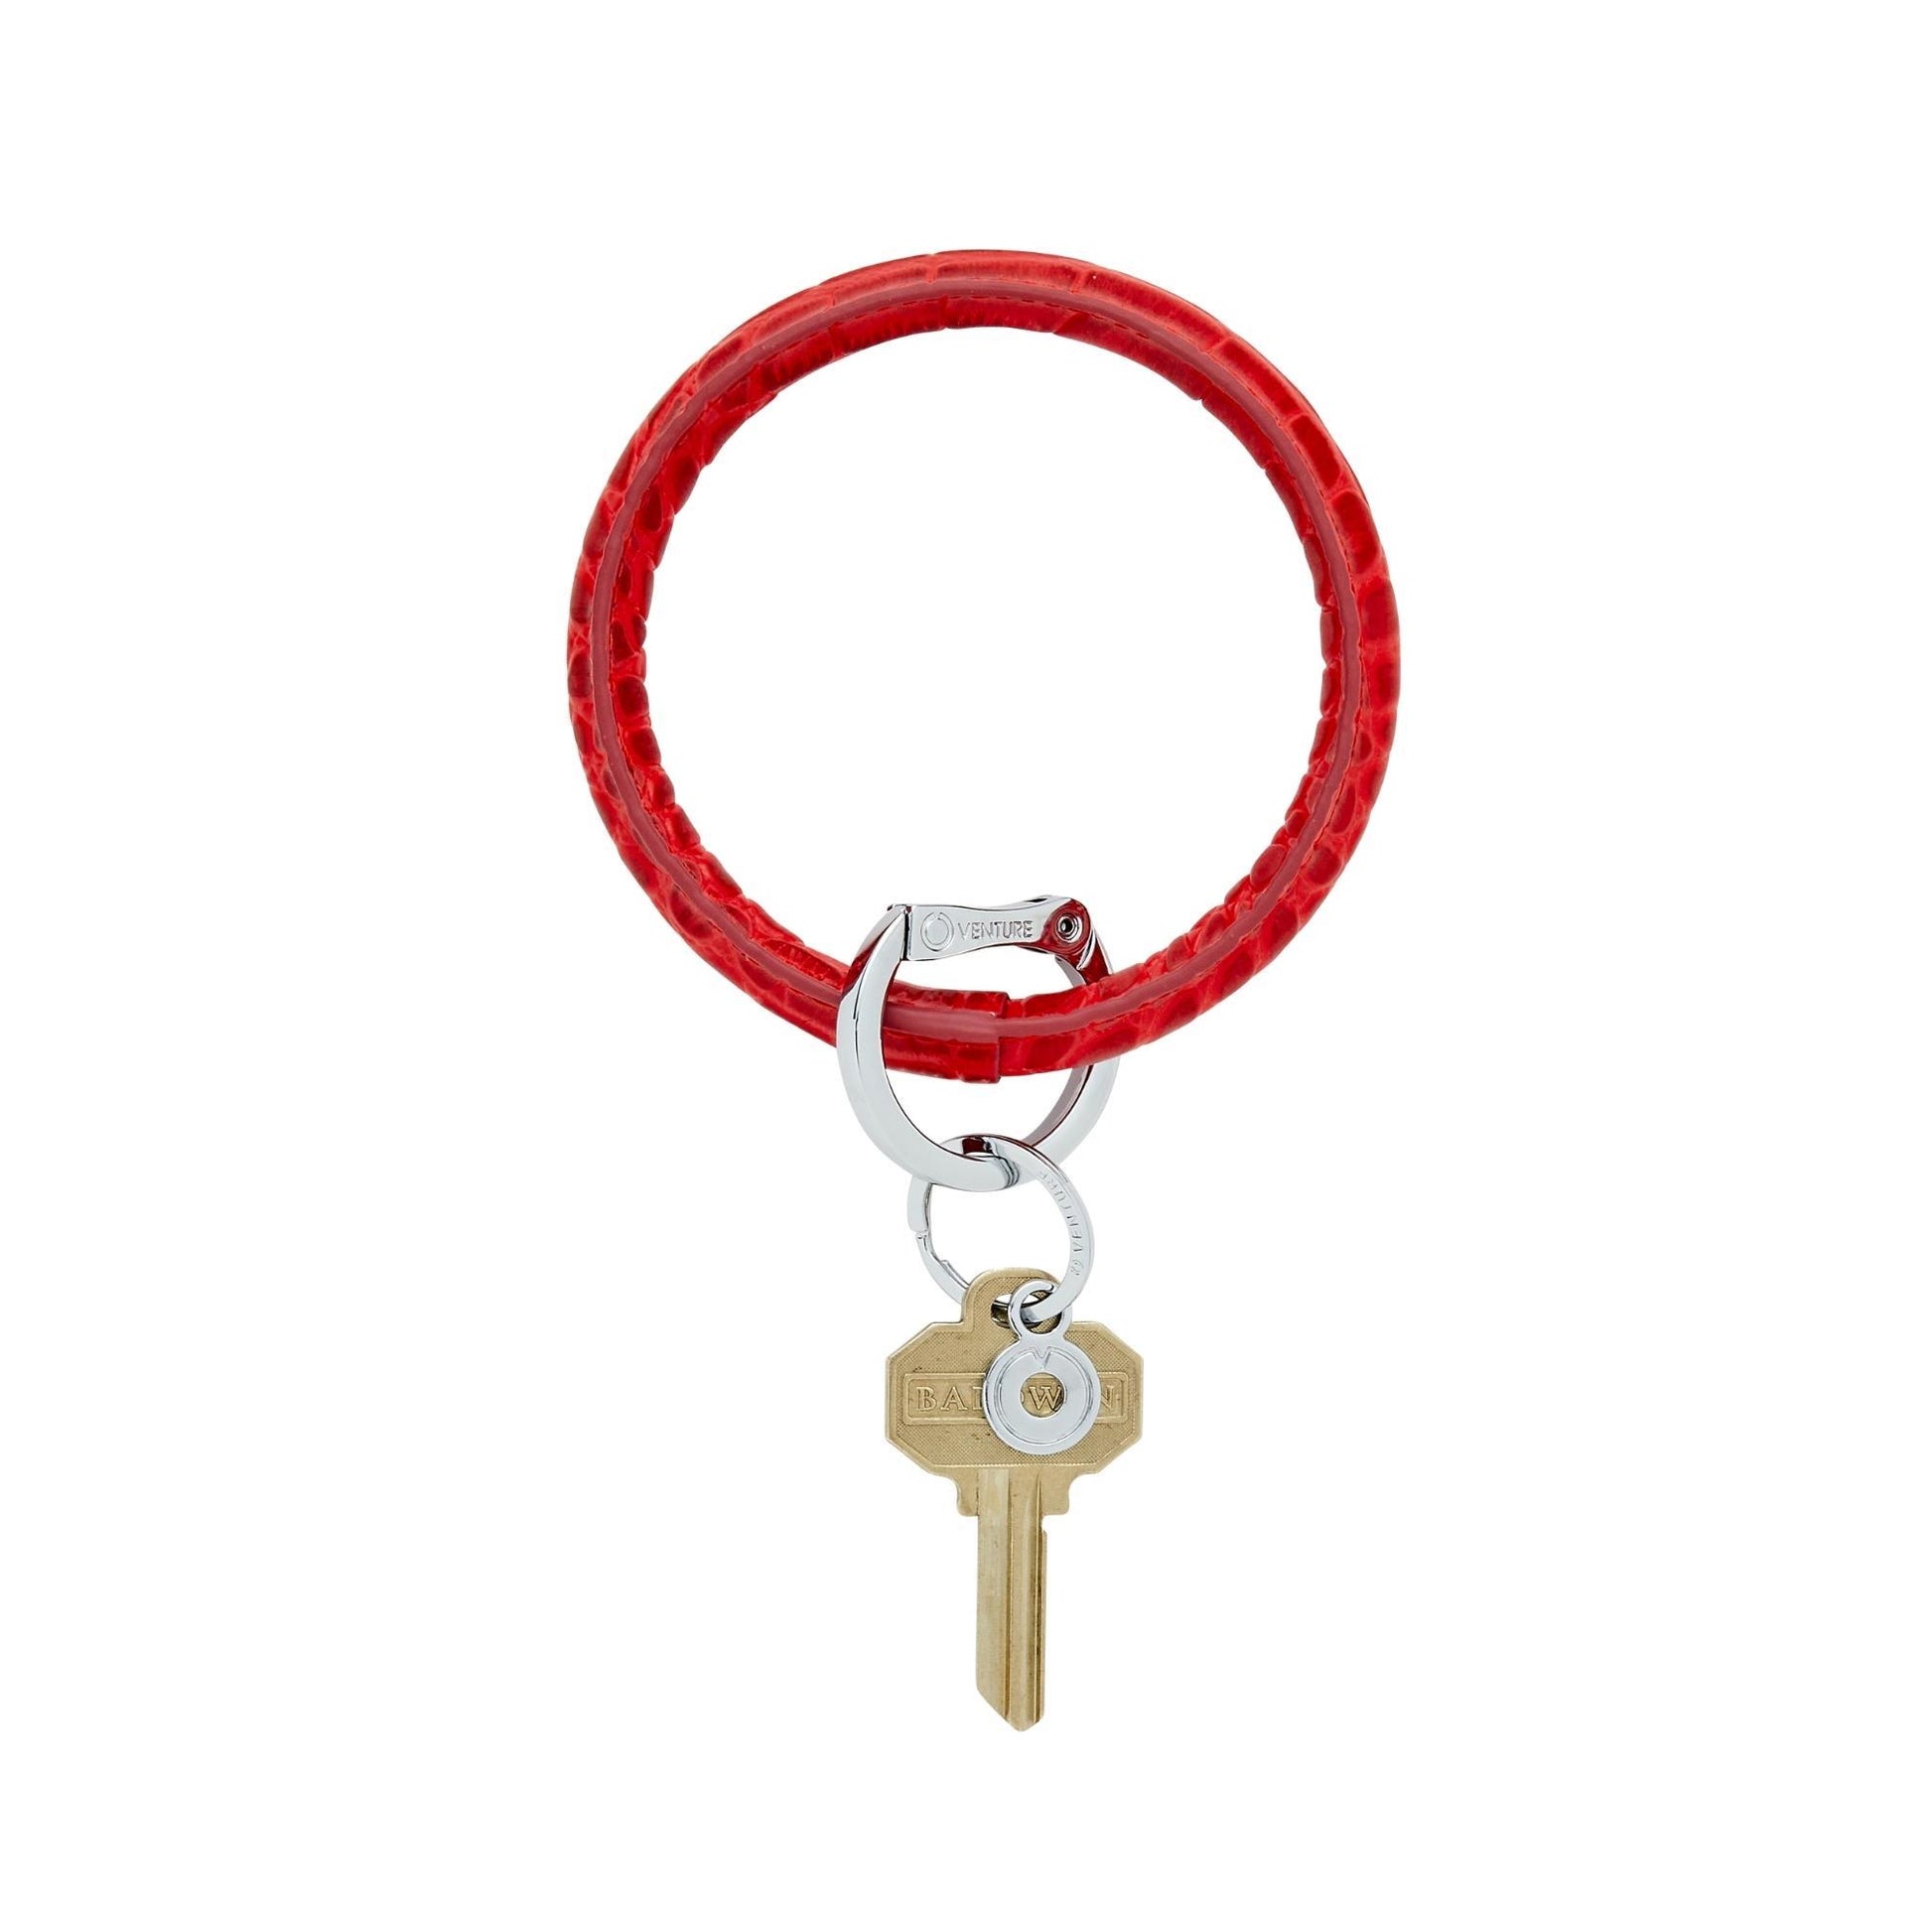 Cherry On Top Croc Embossed Leather Big O Key Ring which is shiny red with silver Oventure locking clasp